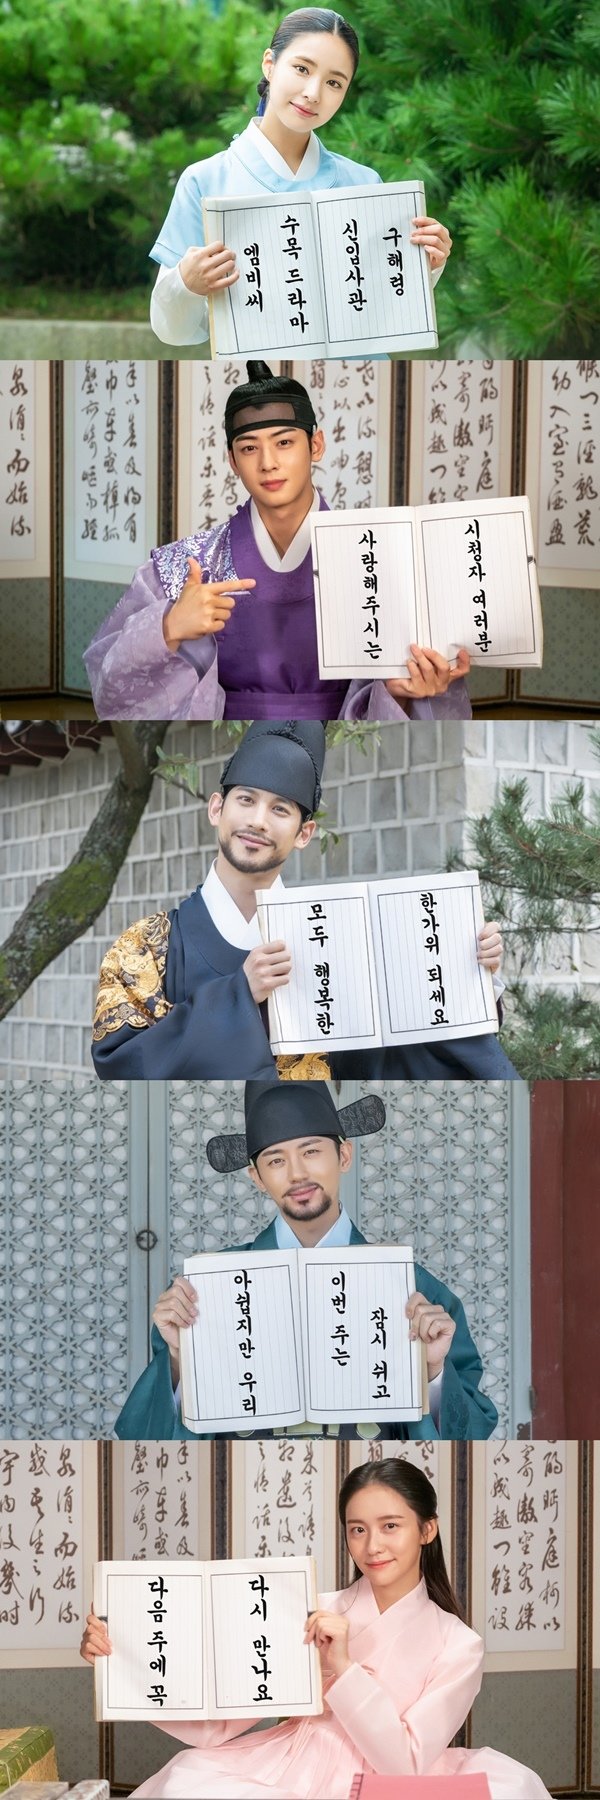 MBC drama Na Hae-ryung released a video with Steel Series, which contains special Chuseok greetings of Actors on November 11.The five main characters greeted viewers ahead of the Chuseok holiday.The SteelSeries released a book and said, All viewers who love Na Hae-ryung, all happy!Unfortunately, we are taking a break this week and I will meet again next week. Shin Se-kyung, who is wearing a blue military uniform and boasts a refreshing charm, said, I am taking a pleasant picture of the love and support you send. He also said, I hope you have a happy holiday.Jung Eun-woo, who had been ringing viewers with sad Confessions in the last broadcast, made the heart of the viewer pound with a thrilling smile.Well come to a rich holiday and well come to a rich story, he said, raising expectations for next weeks broadcast.Park Ki-woong also laughed at those who said, I hope you have a good time with your family in the national holiday, showing off the charm of soft reversal, unlike the charismatic appearance in the play.Lee Ji-hoon, unlike his blunt officer Min Woo-won, said, I started shooting in the hot summer, but it is Chuseok.I hope you have a good time with your family.  Please love Na Hae-ryung! Finally, Park Ji-hyun caught his eye with a beautiful uniform, not a military uniform.She said with a sweet smile, I will be very sorry for the Chuseok holiday, but I would like to ask for more love and support next week.In the 29-32 episode of the new employee, Shin Se-kyung (old Na Hae-ryung) and Jung Eun-woo were drawn in the romance crisis due to the sudden preparation of the wedding of Jung Eun-woo (Lee Rim).Shin Se-kyung finally rejected Jung Eun-woos love confessions, and the two of them were angry at each other and stimulated the tears of viewers.Among them, the Seoraewon incident 20 years ago is gradually revealed on the surface of the water, and interest in the future story is increasing.It will be broadcast on the 18th, and will be held on the 18th.